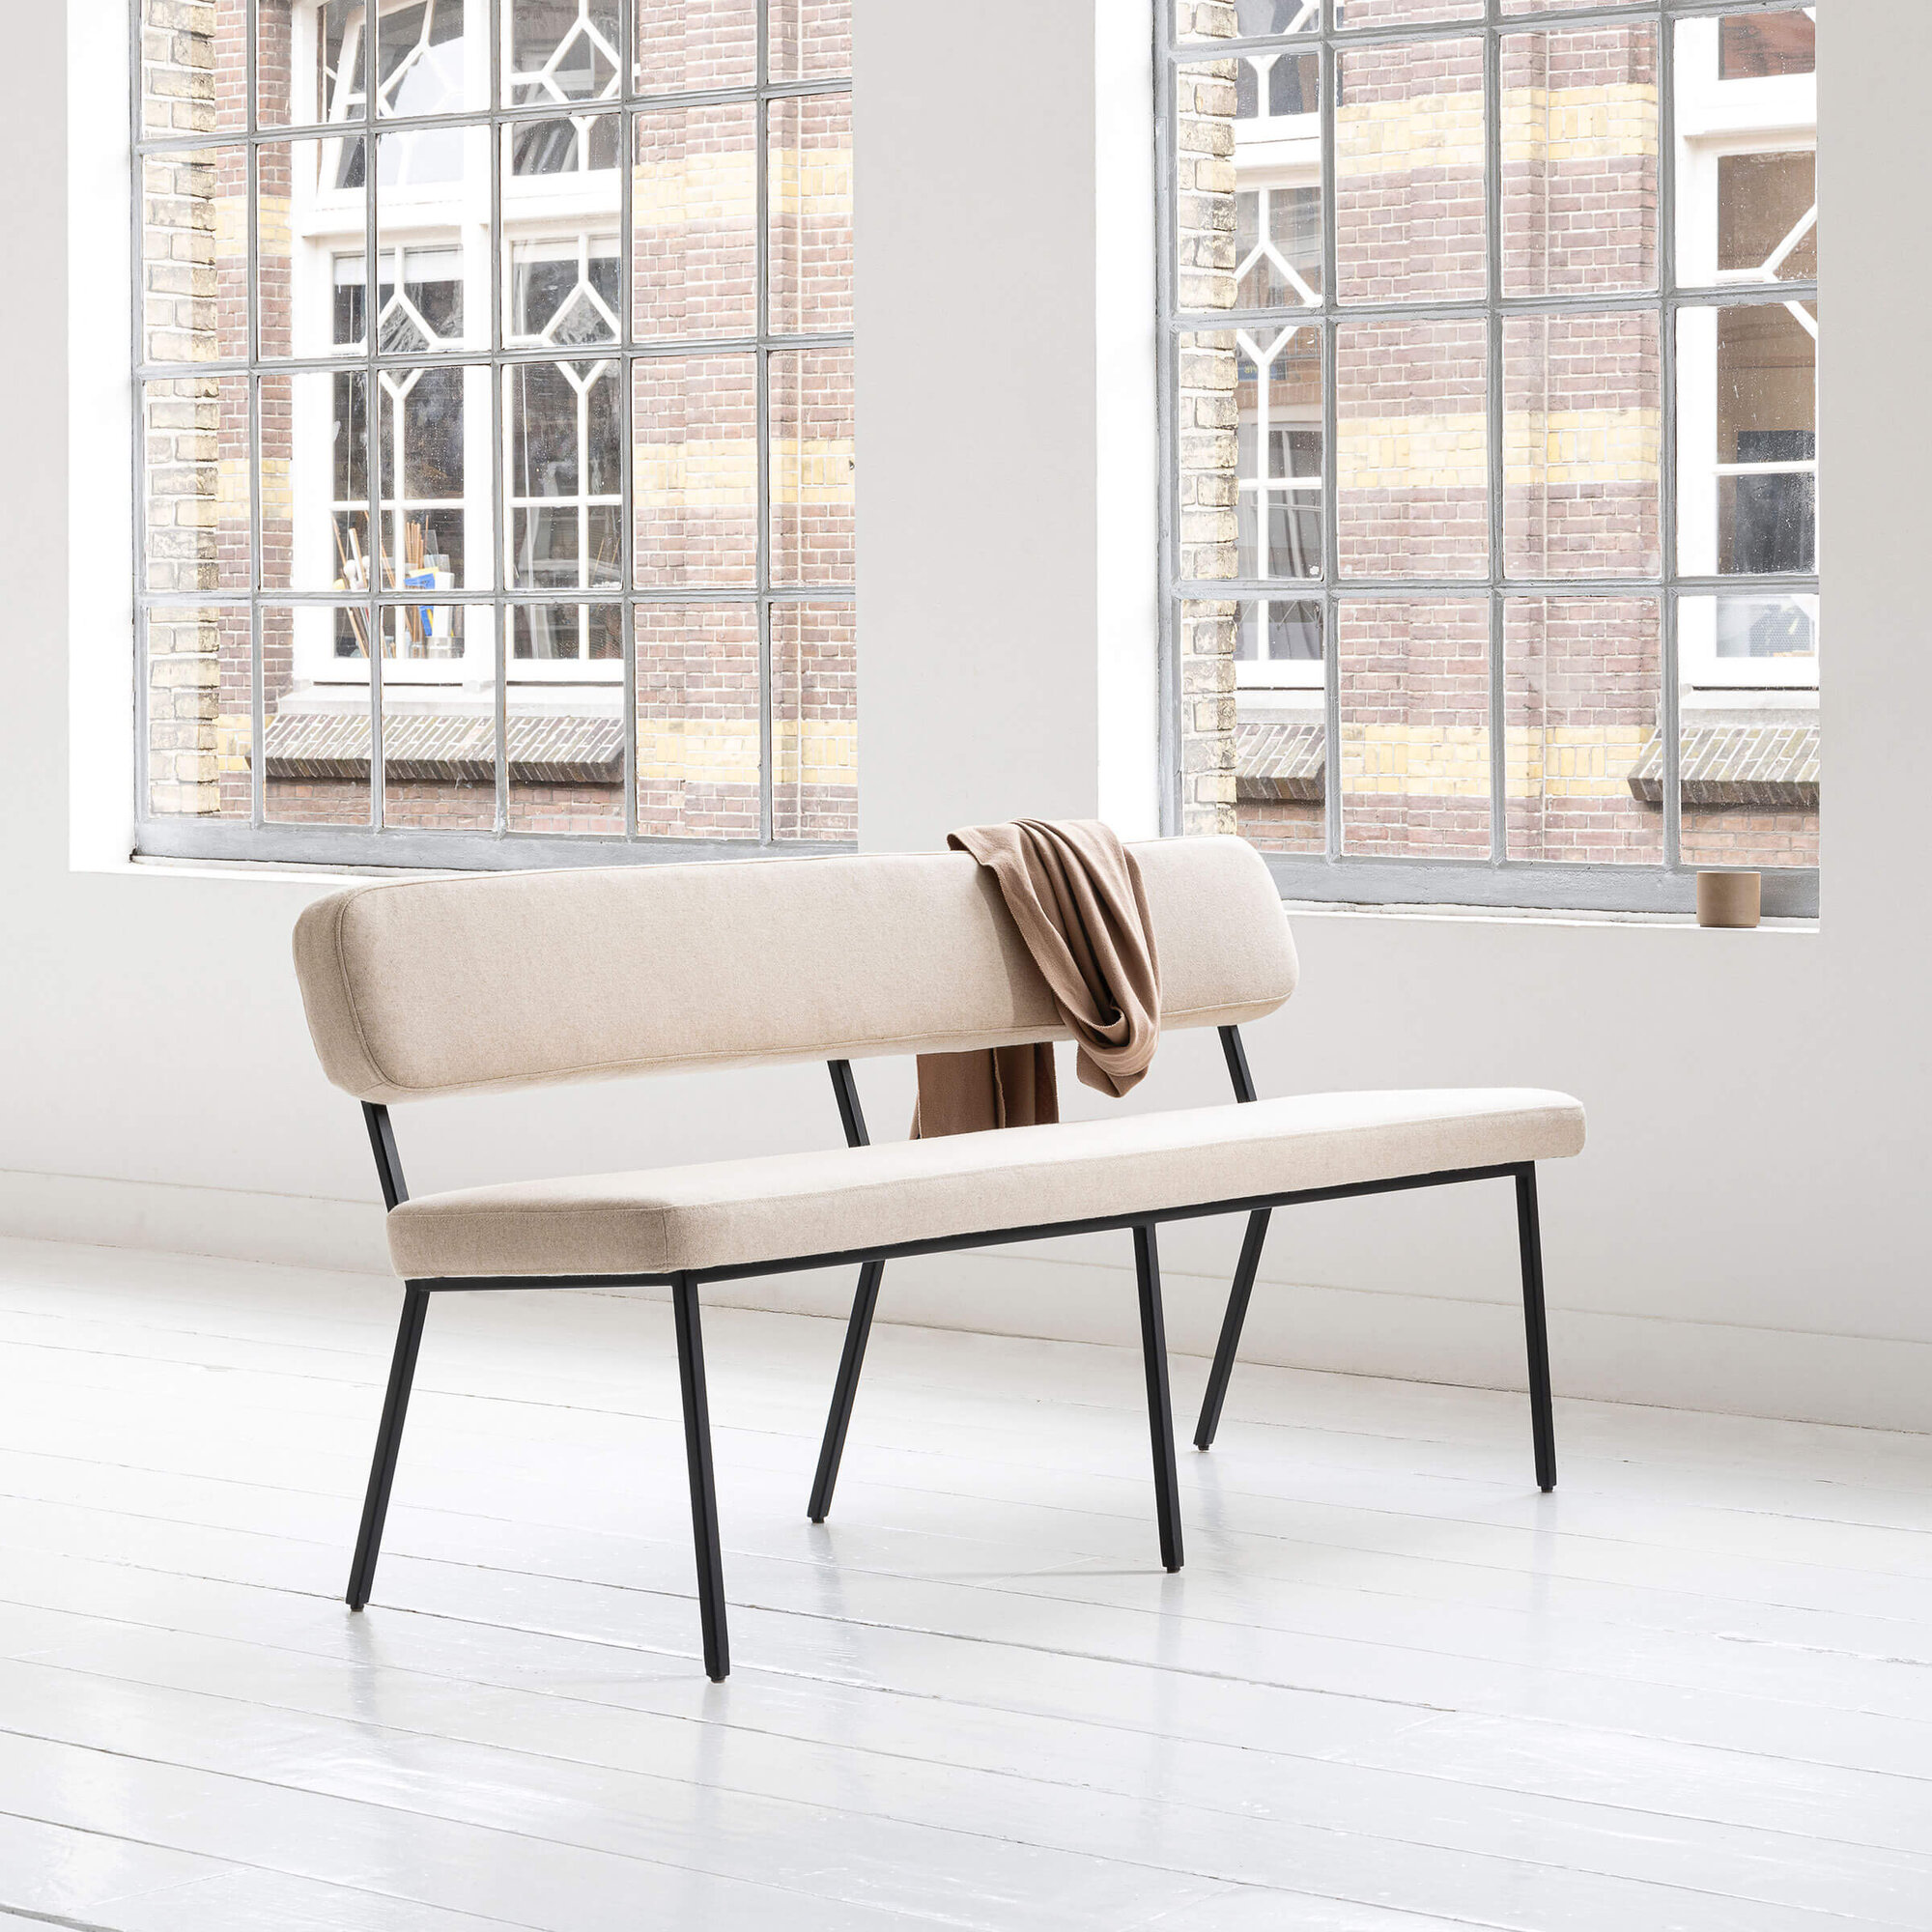 Design modern dining chair | Coode dining bench 180  orion plumb168 | Studio HENK| 